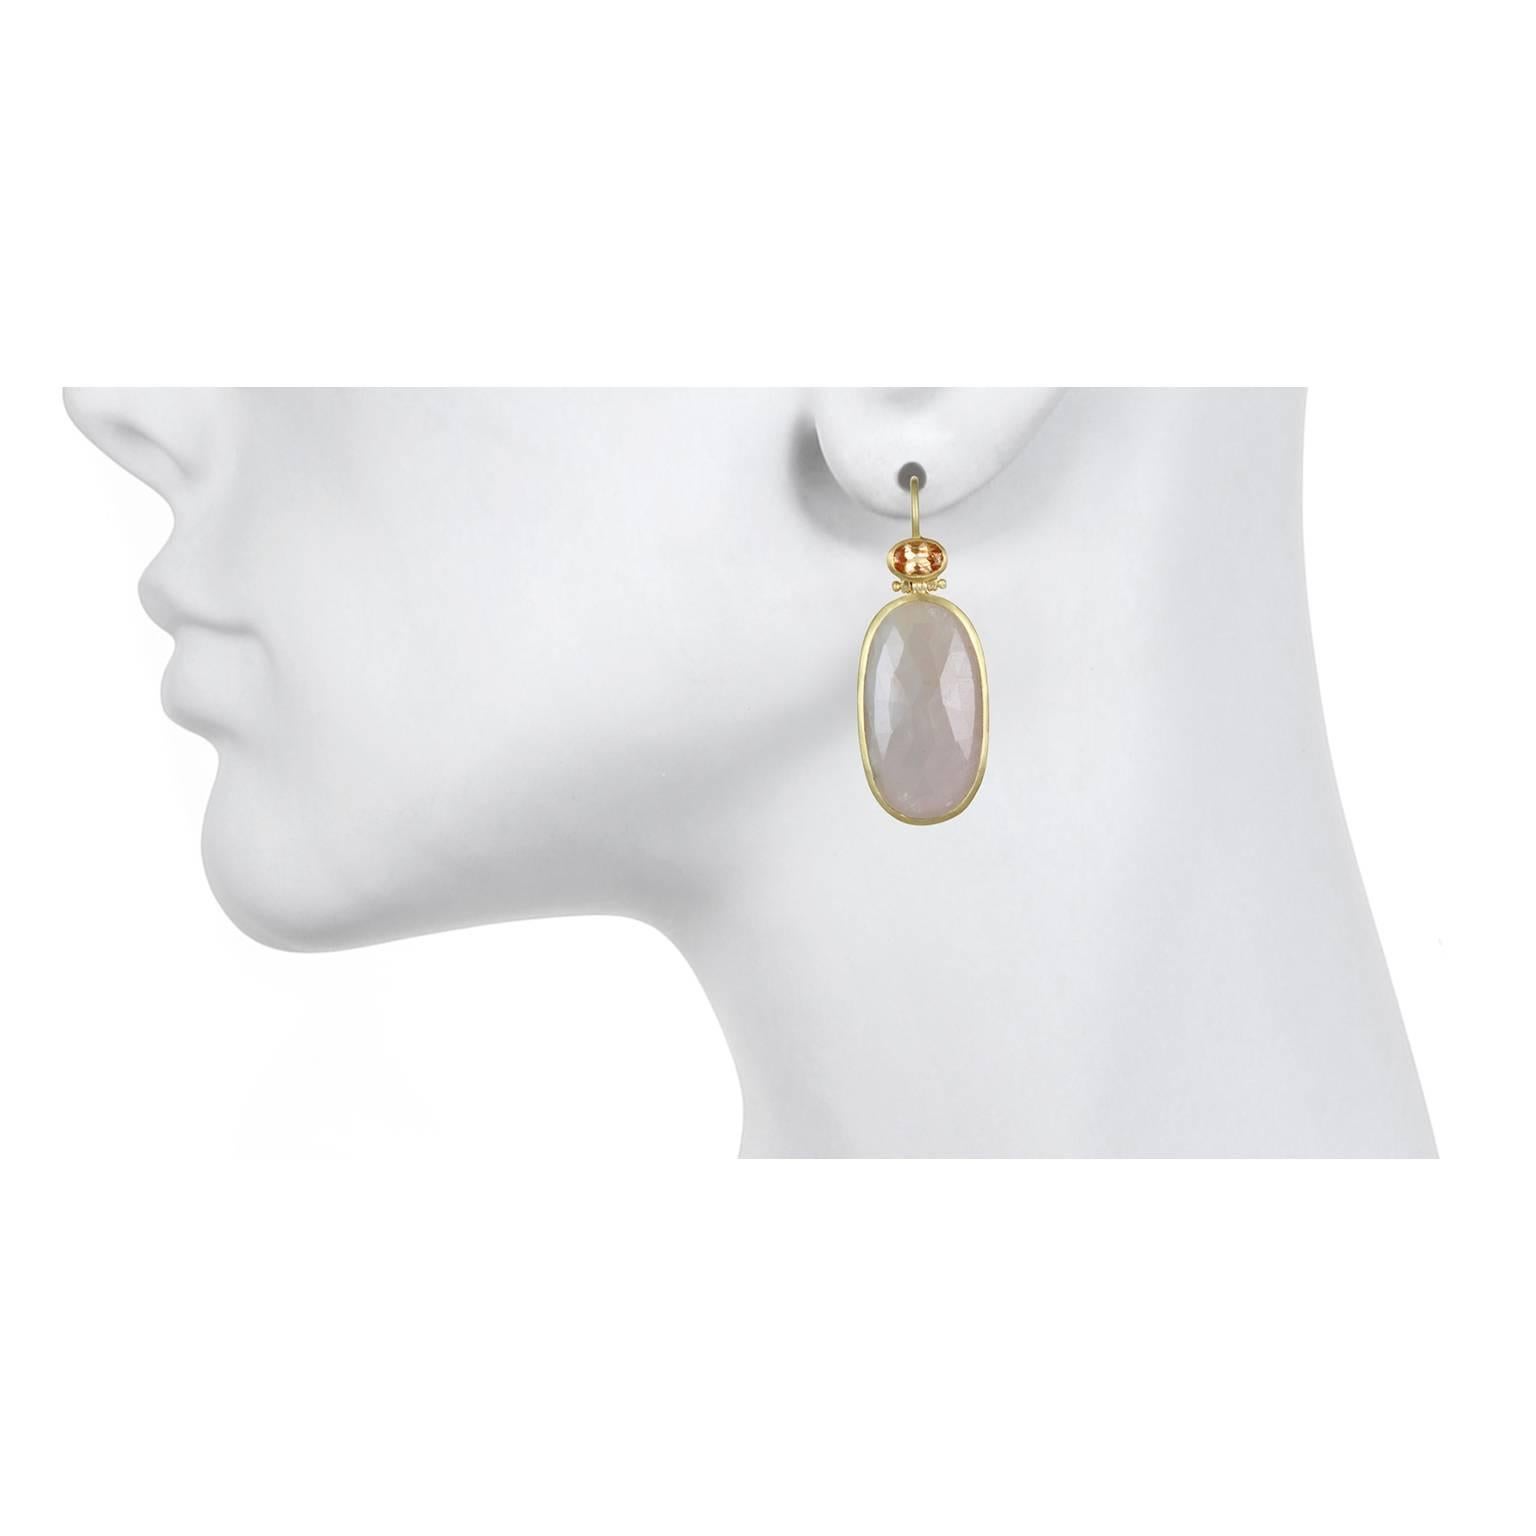 For those of us who appreciate and covet items that are truly unique, these earrings are it!  Handcrafted in 18k gold, blush-pink sapphire slices are bezel set and paired with faceted oval Imperial Topaz. The perfect complement adding color and